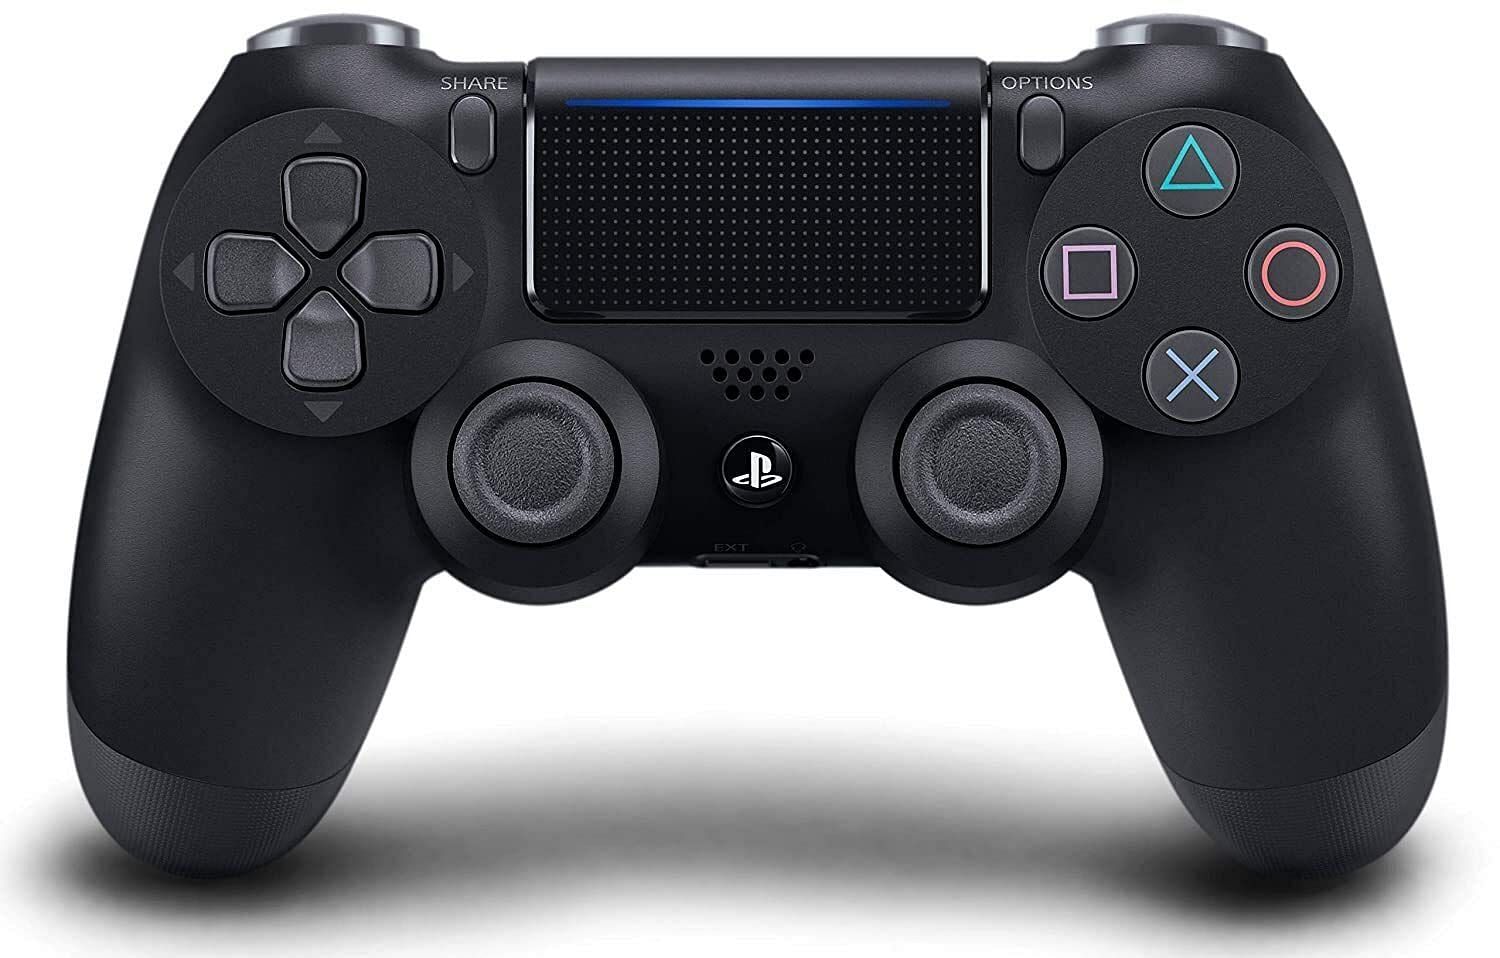 The Dualshock 4 works on the PlayStation 4 as well (Image via Amazon)